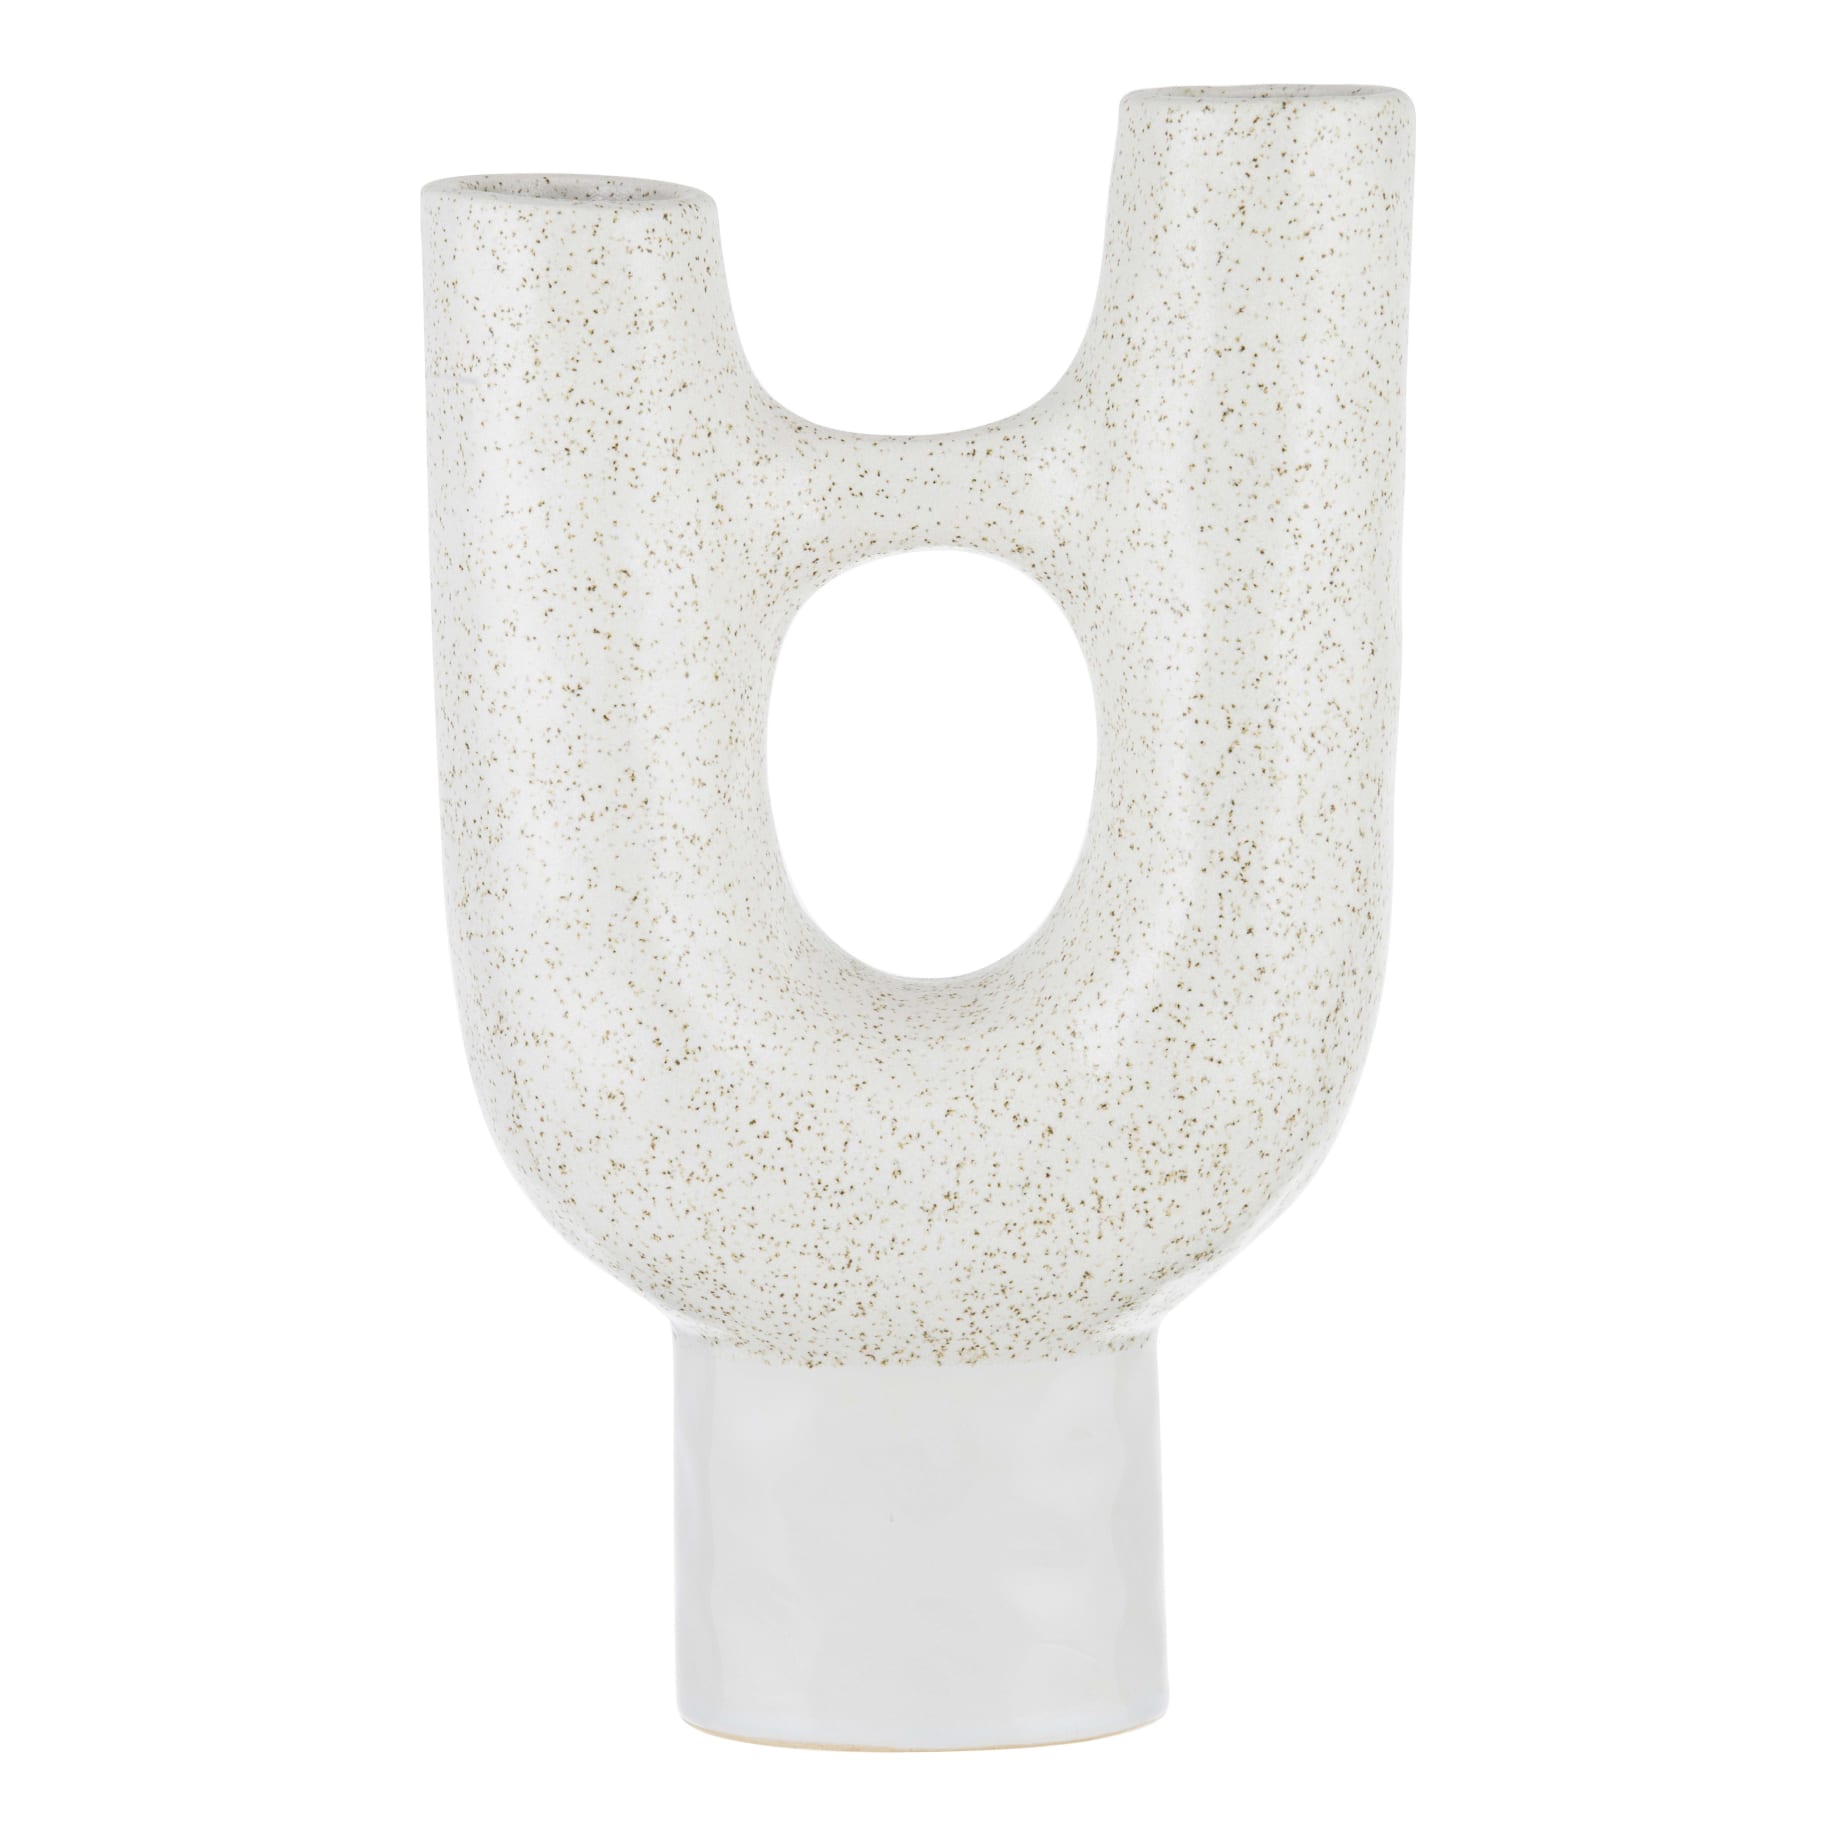 Formation Vase 21.5x35cm in Speckle White